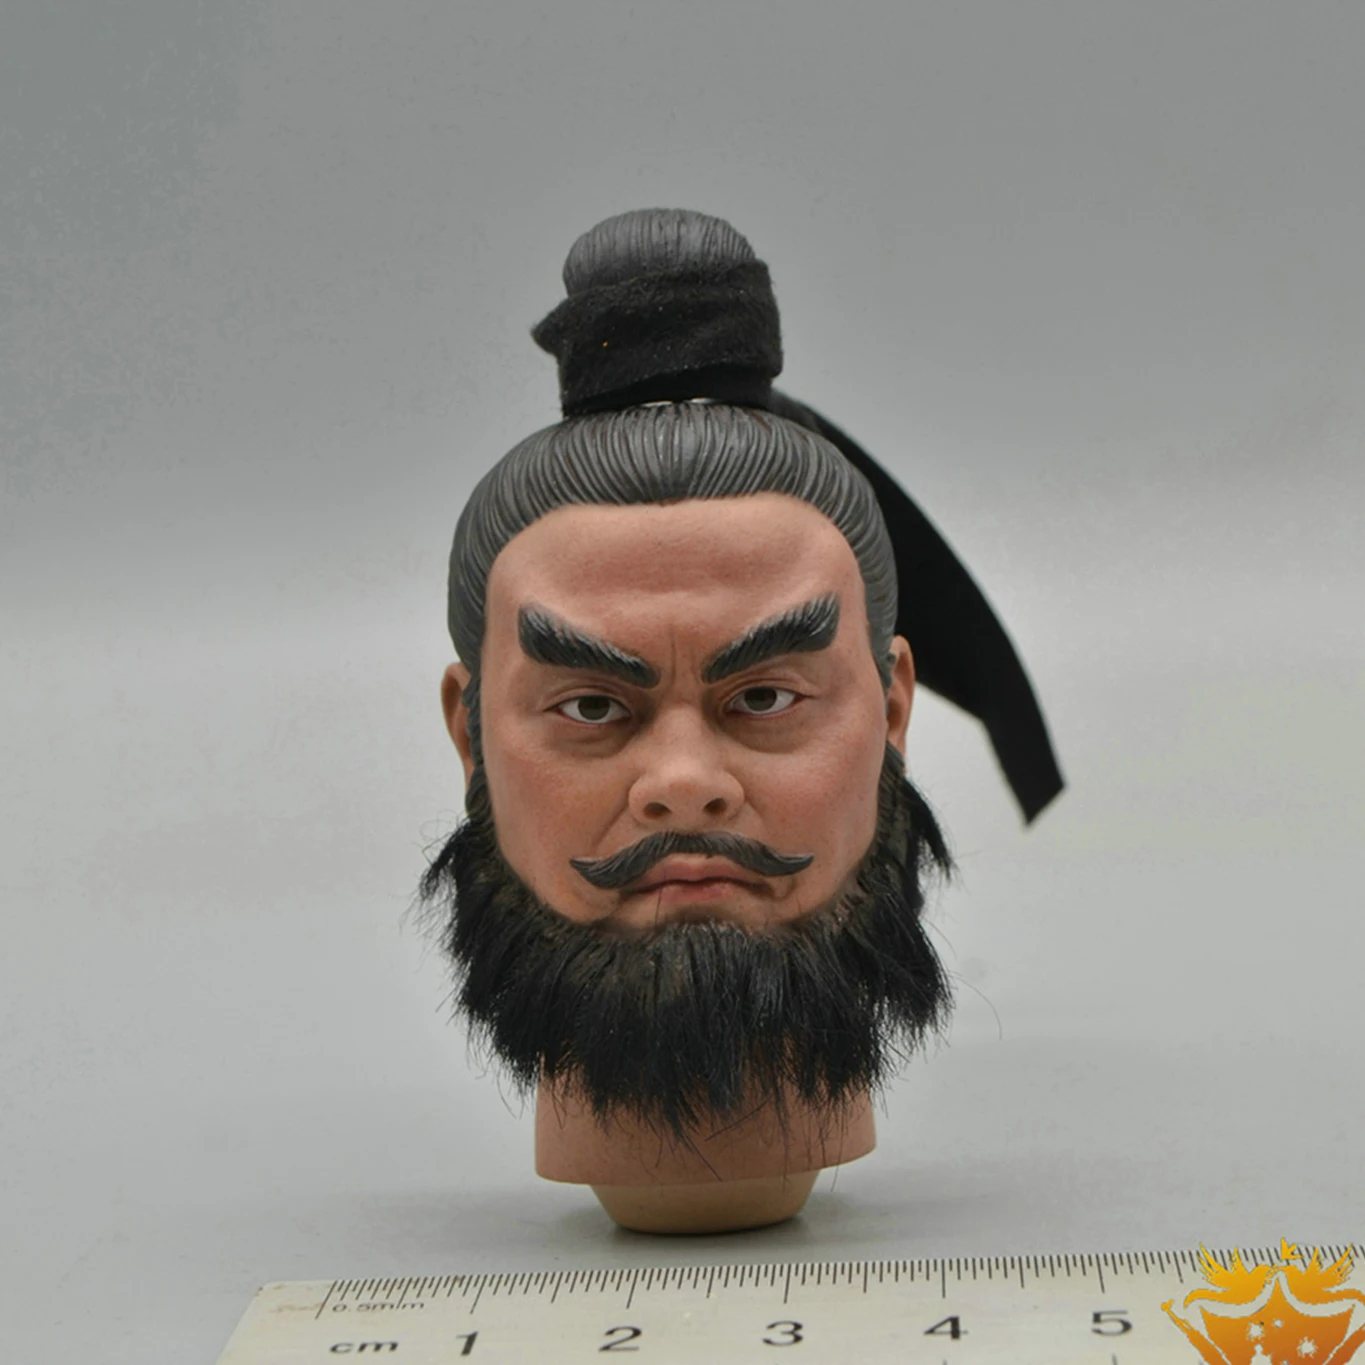 

303TOYS MP014 1/6th Romance of the Three Kingdoms Tough Man Warrior Zhang Fei Head Sculpture Normal Version Fit 12" Action Doll